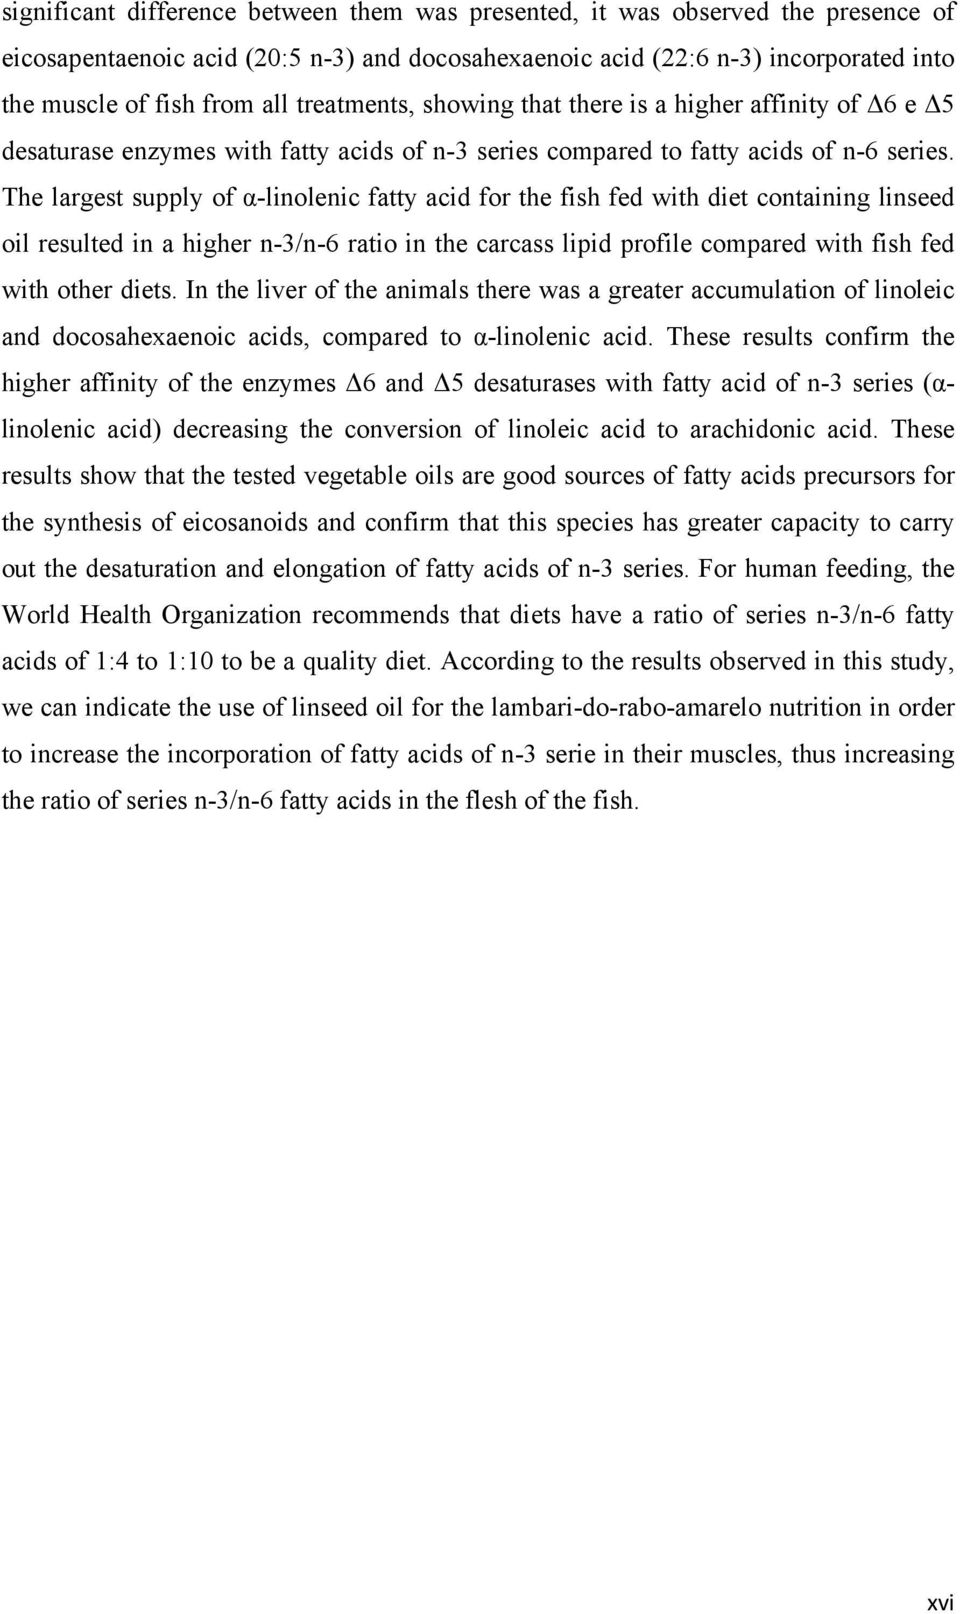 The largest supply of α-linolenic fatty acid for the fish fed with diet containing linseed oil resulted in a higher n-3/n-6 ratio in the carcass lipid profile compared with fish fed with other diets.